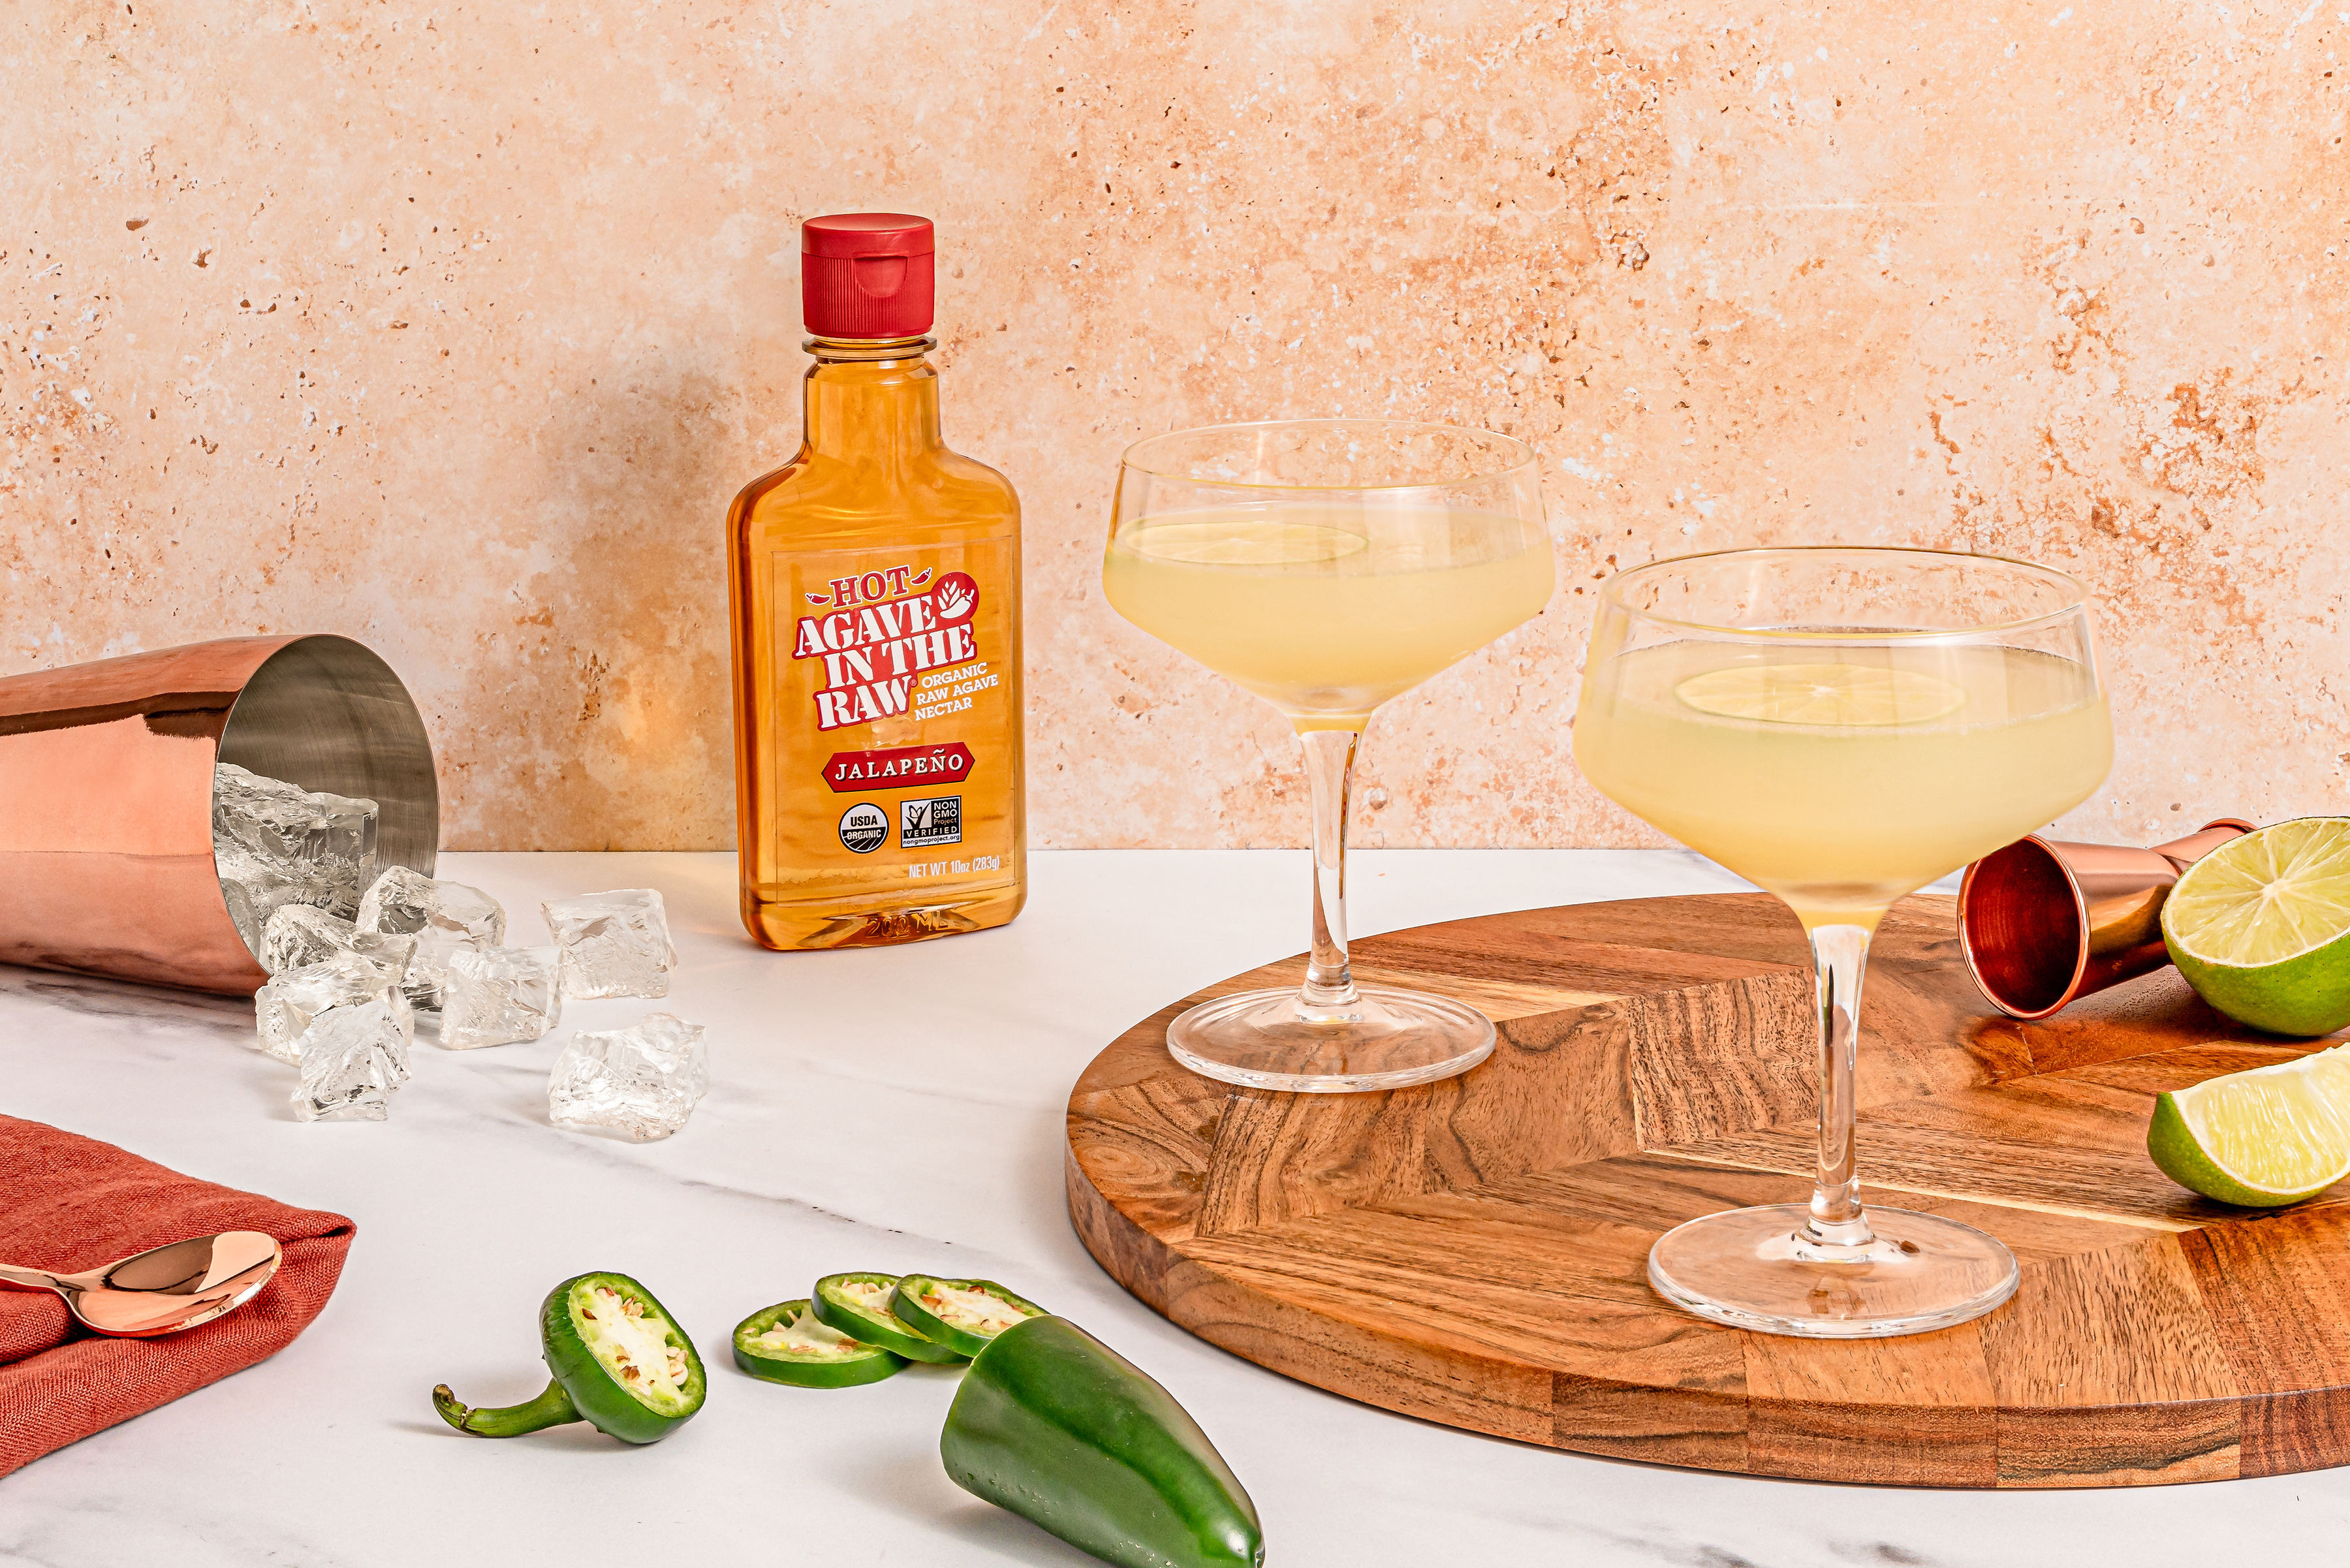 TURN UP THE HEAT WITH ORGANIC HOT AGAVE IN THE RAW®, NOW AVAILABLE ACROSS PUBLIX STORES NATIONWIDE 159